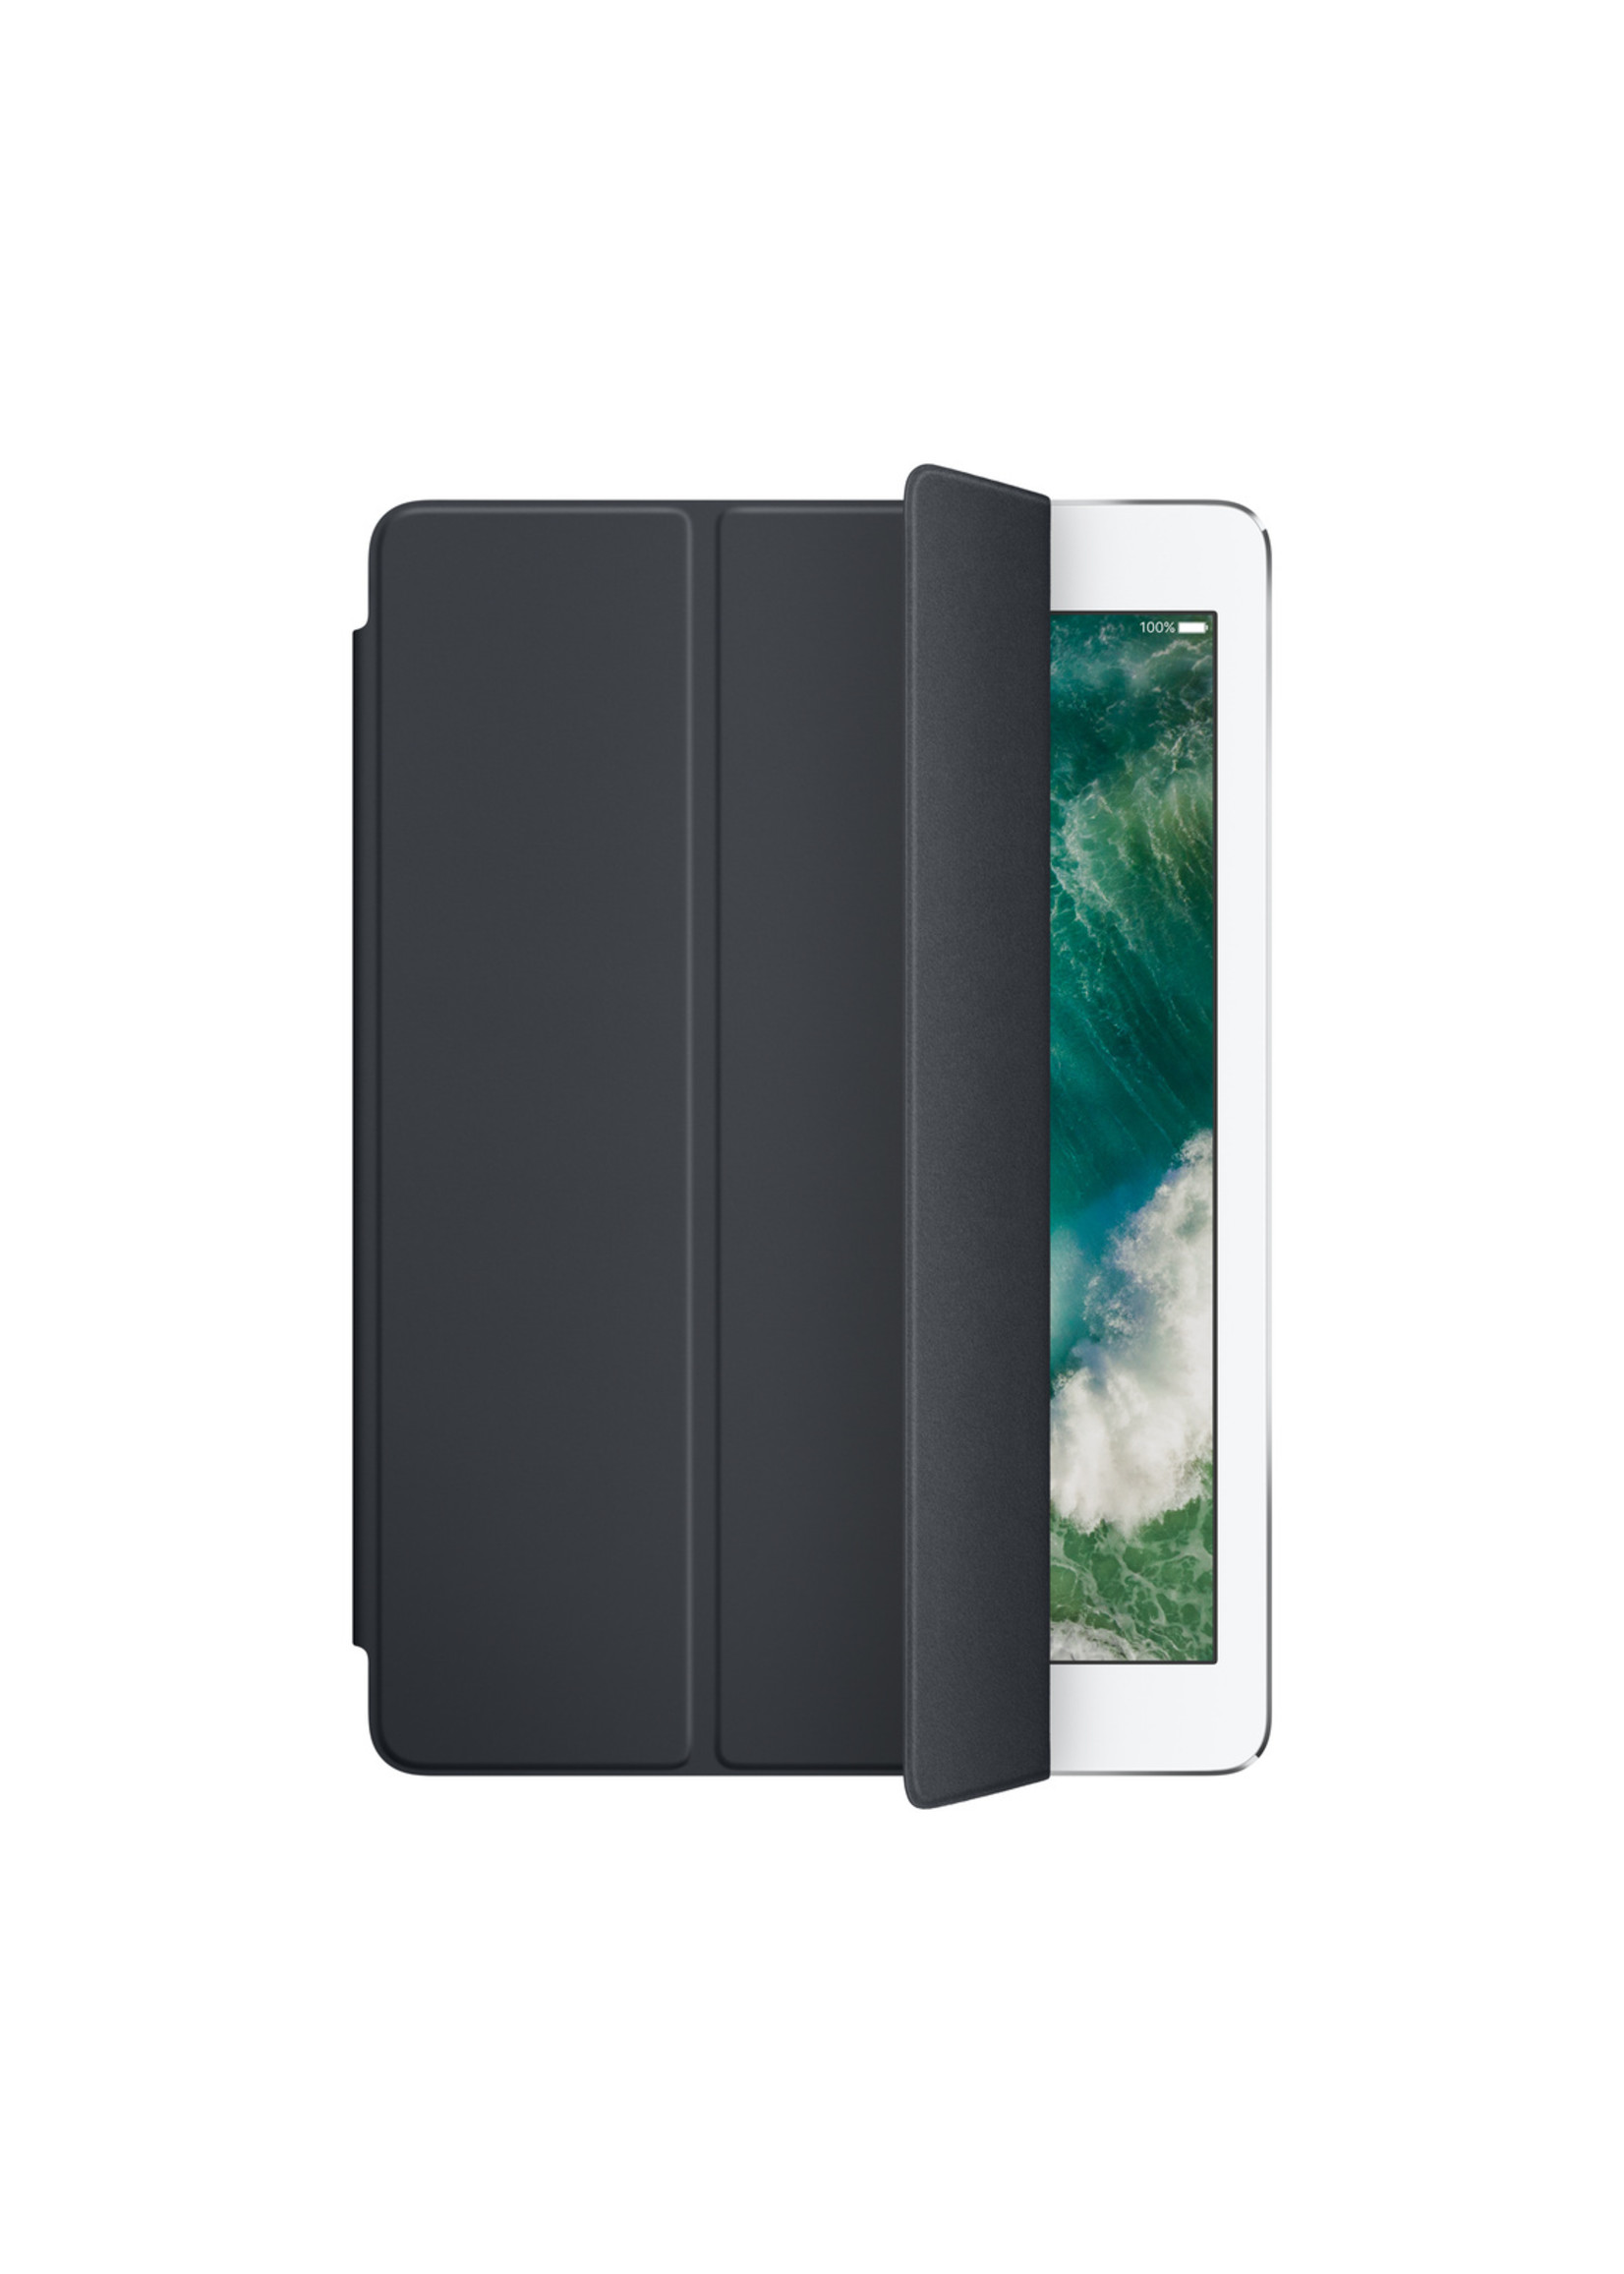 iPad 9.7-inch Smart Cover - Charcoal Gray (CLEARANCE)